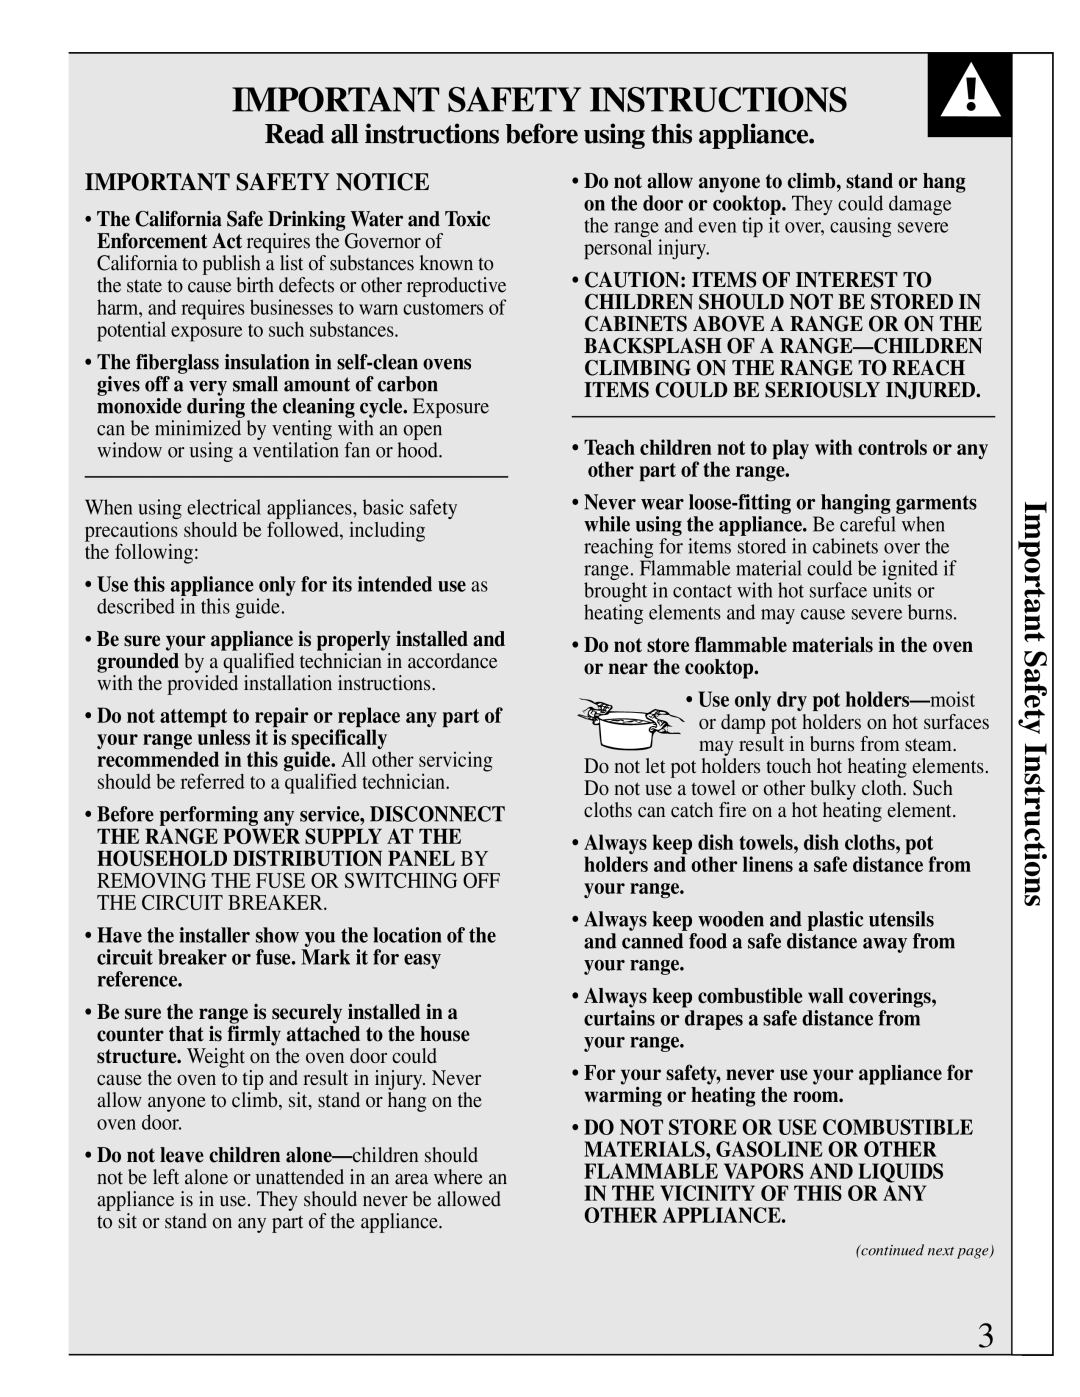 GE JDP36, JDP37 Important Safety Instructions, Read all instructions before using this appliance, Important Safety Notice 